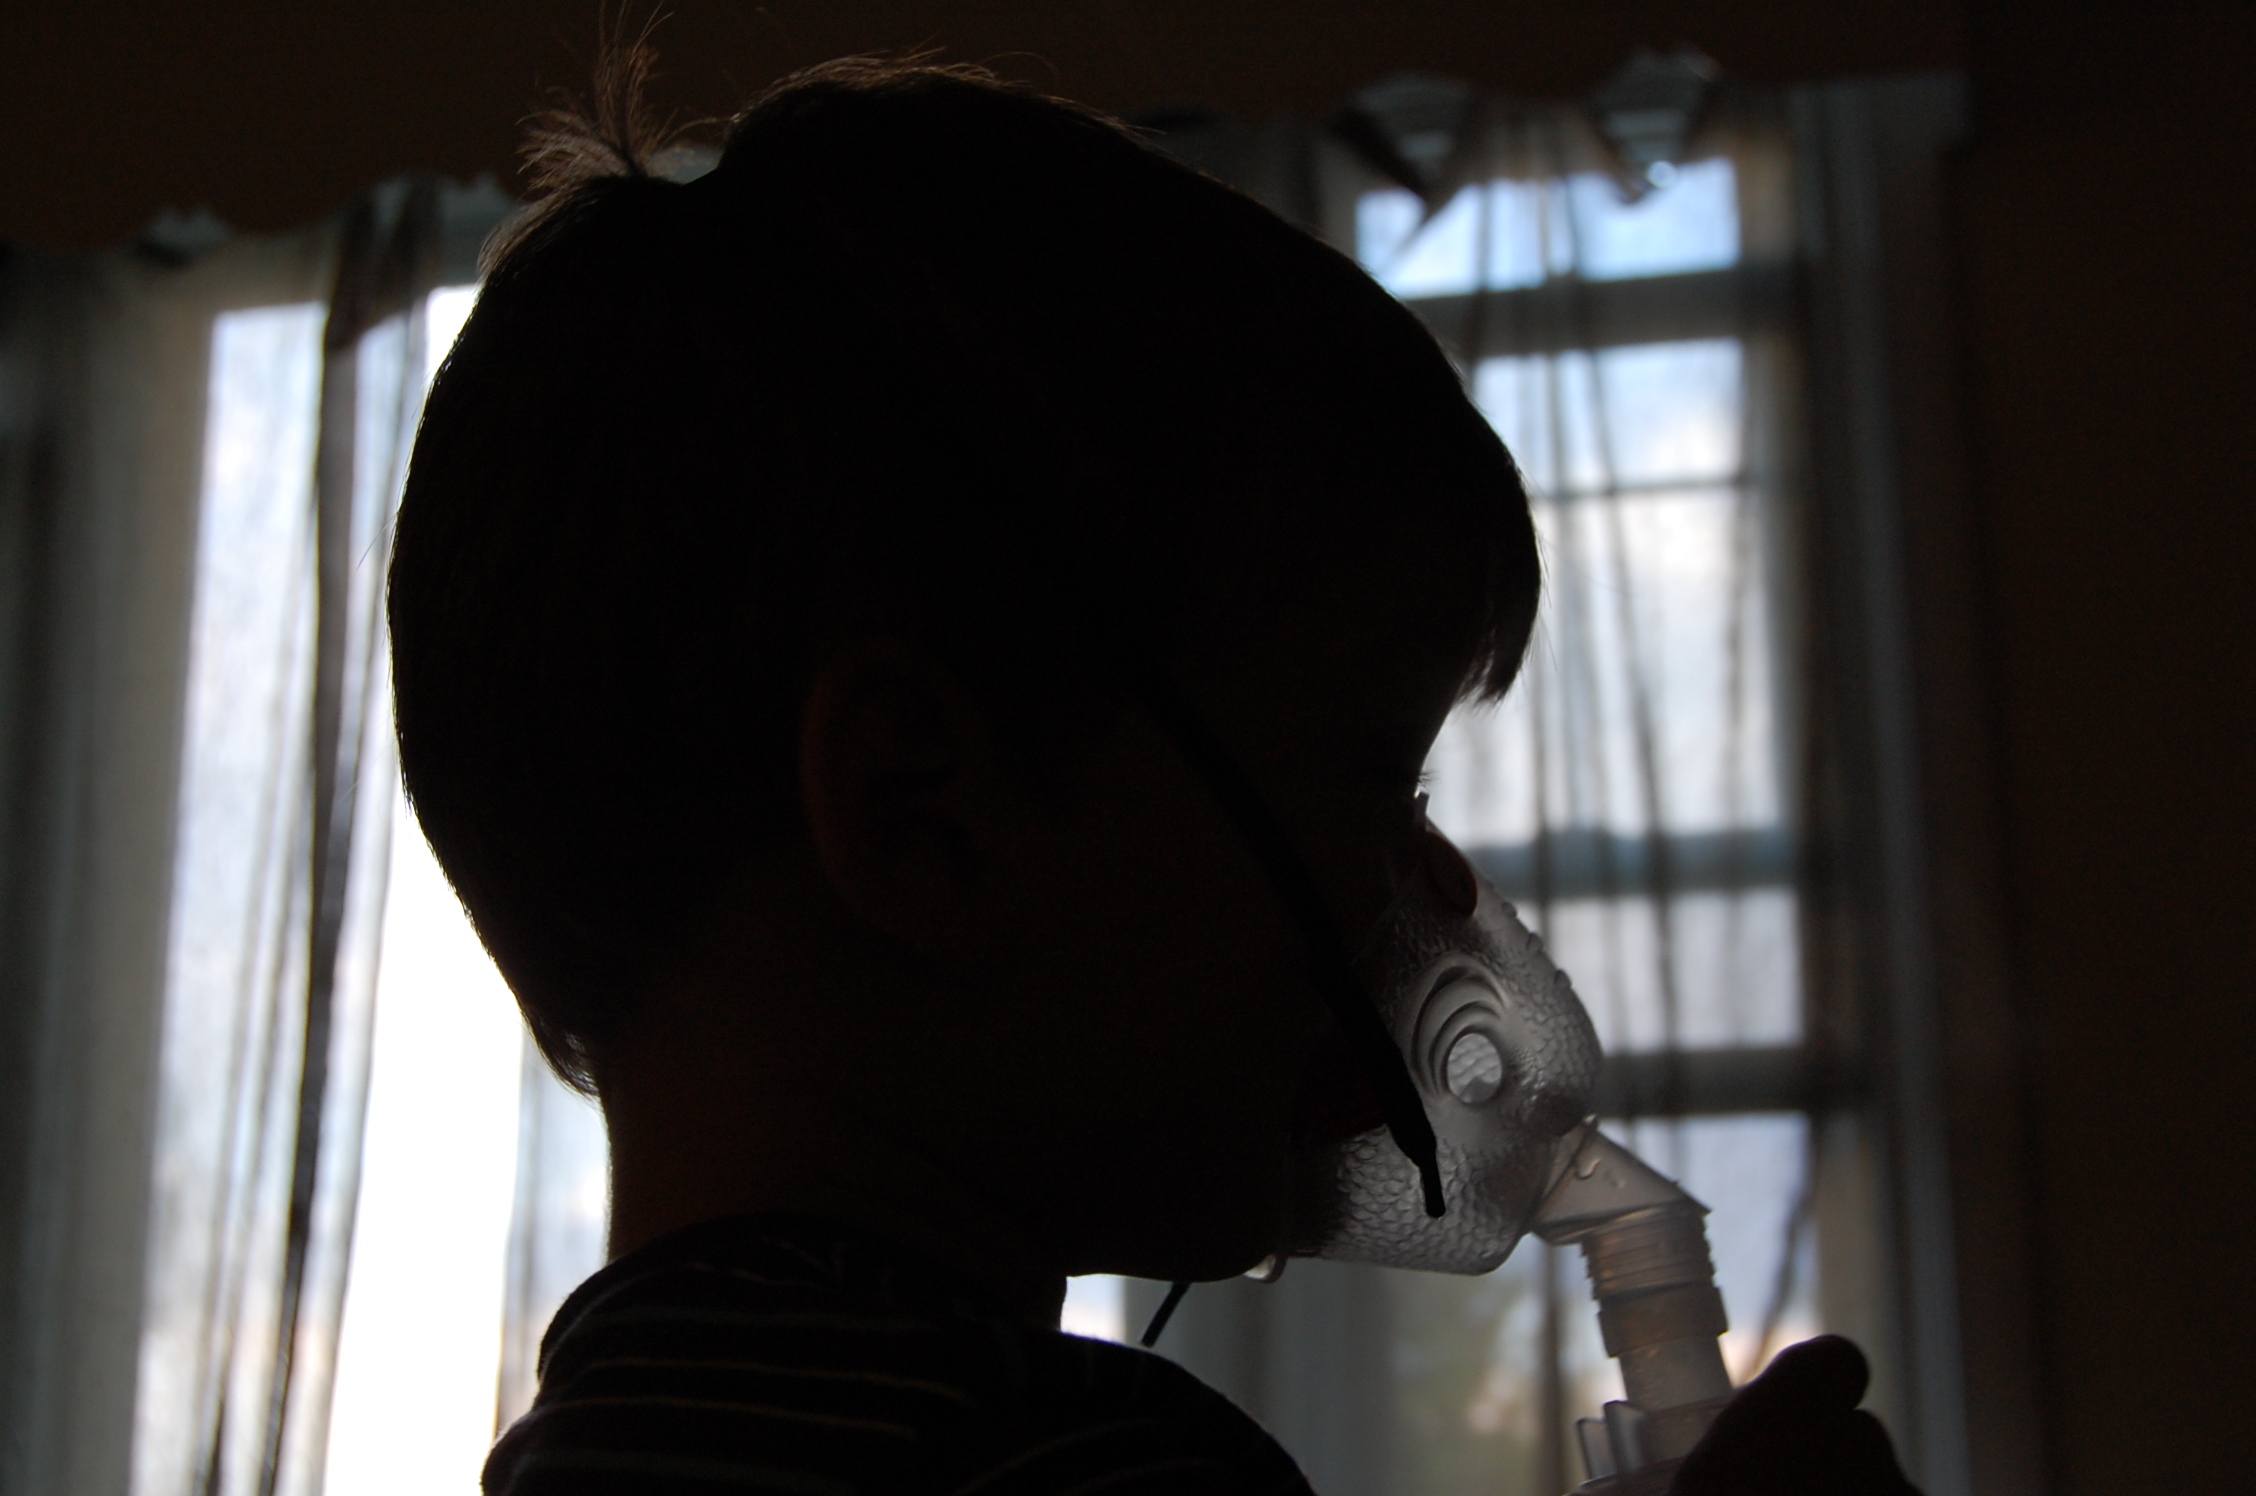 Silhouette of child with asthma mask